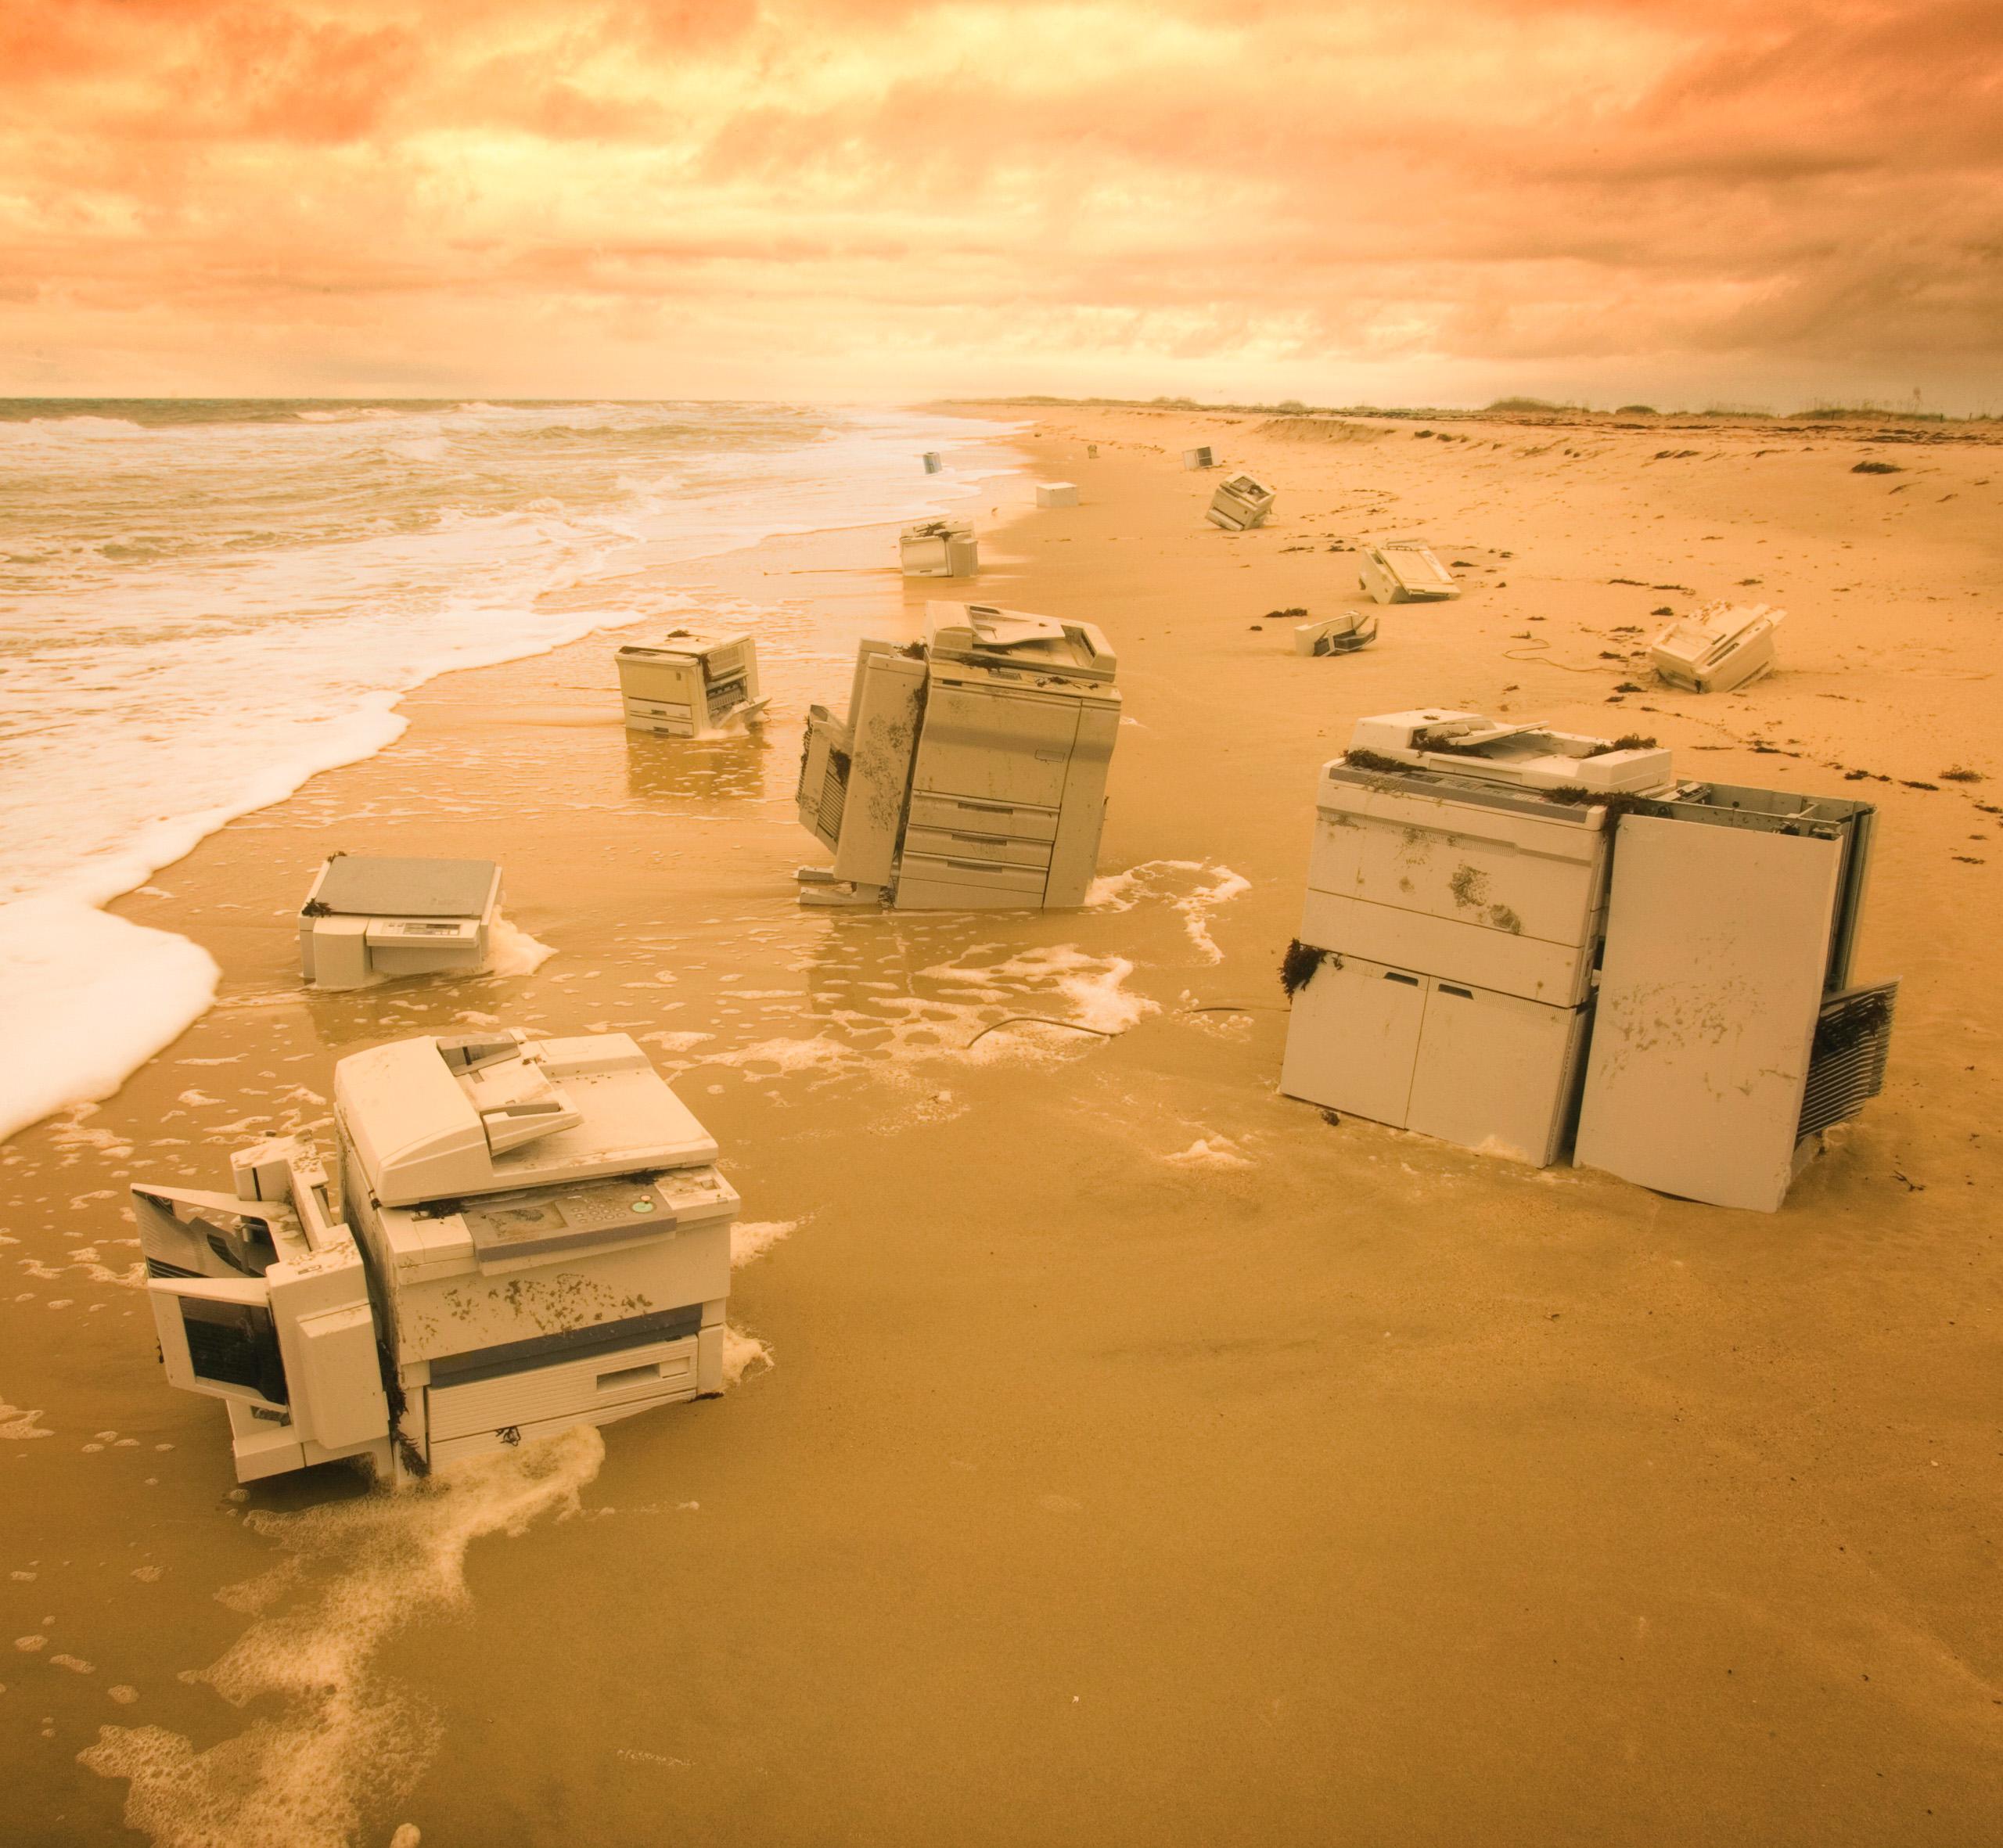 Copiers All Washed Up  - Photograph by Nick Vedros